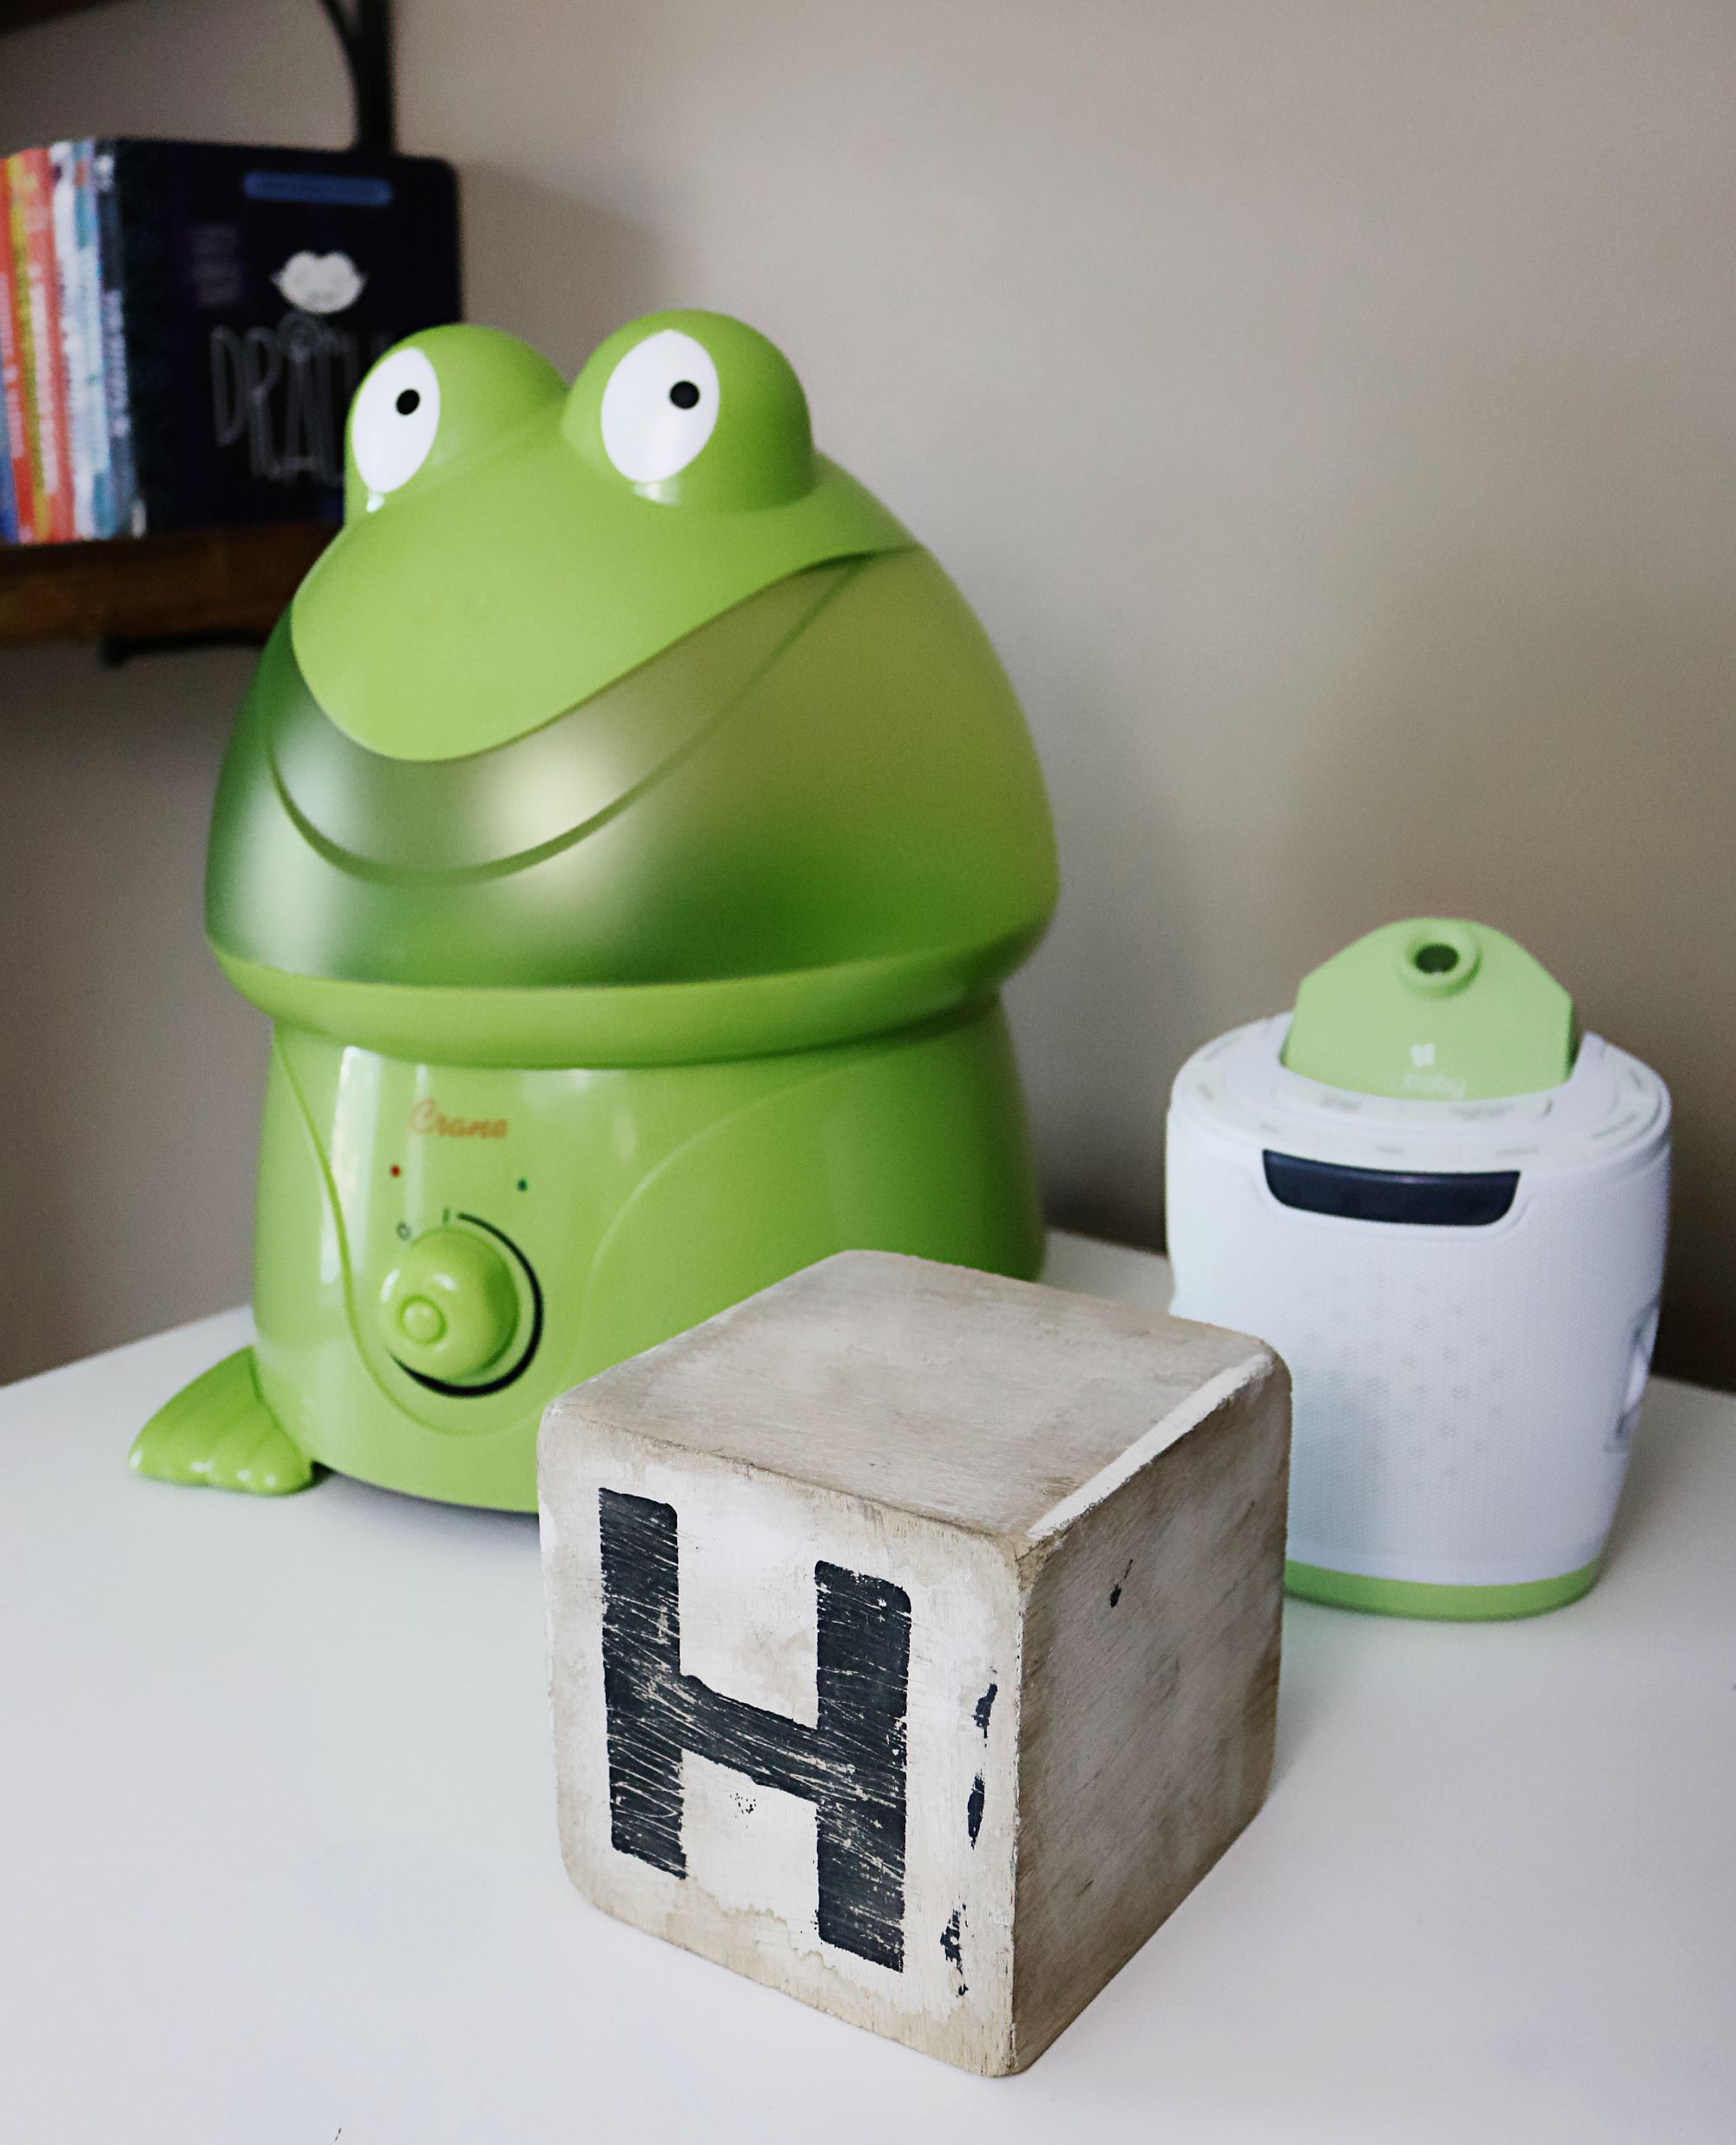 Crane USA Adorable Ultrasonic Cool Mist Humidifier, 1 Gallon, 500 Sq Ft Coverage, 24 Hour Run Time - Frog - image 4 of 7